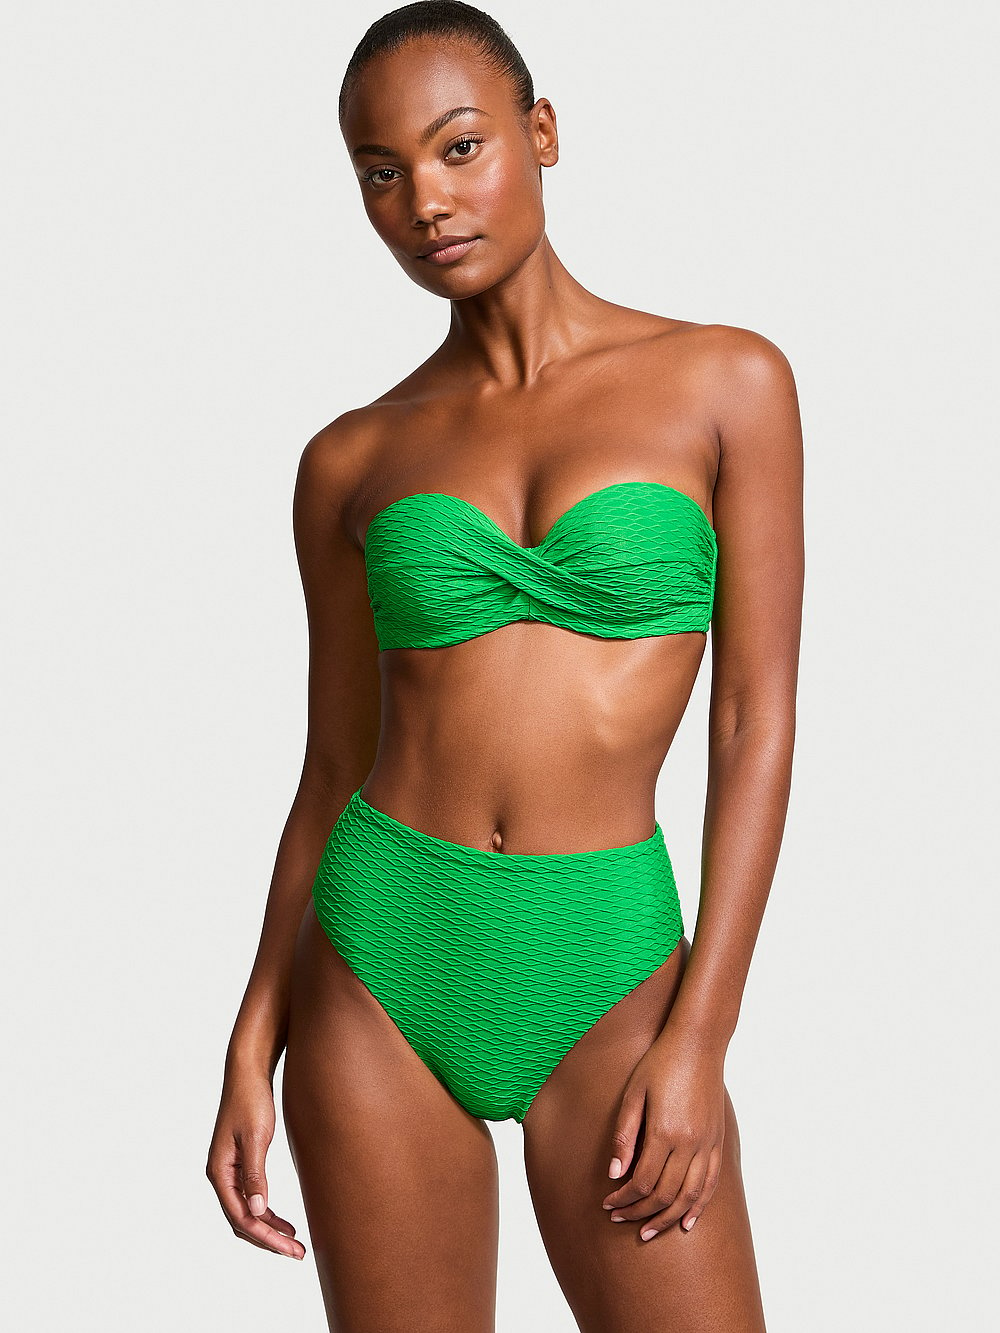 Victoria's Secret, Victoria's Secret Swim Mix & Match Twist Push-Up Bandeau Top, Island Jade, onModelFront, 1 of 3 Ange-Marie is 5'10" and wears 34B or Small